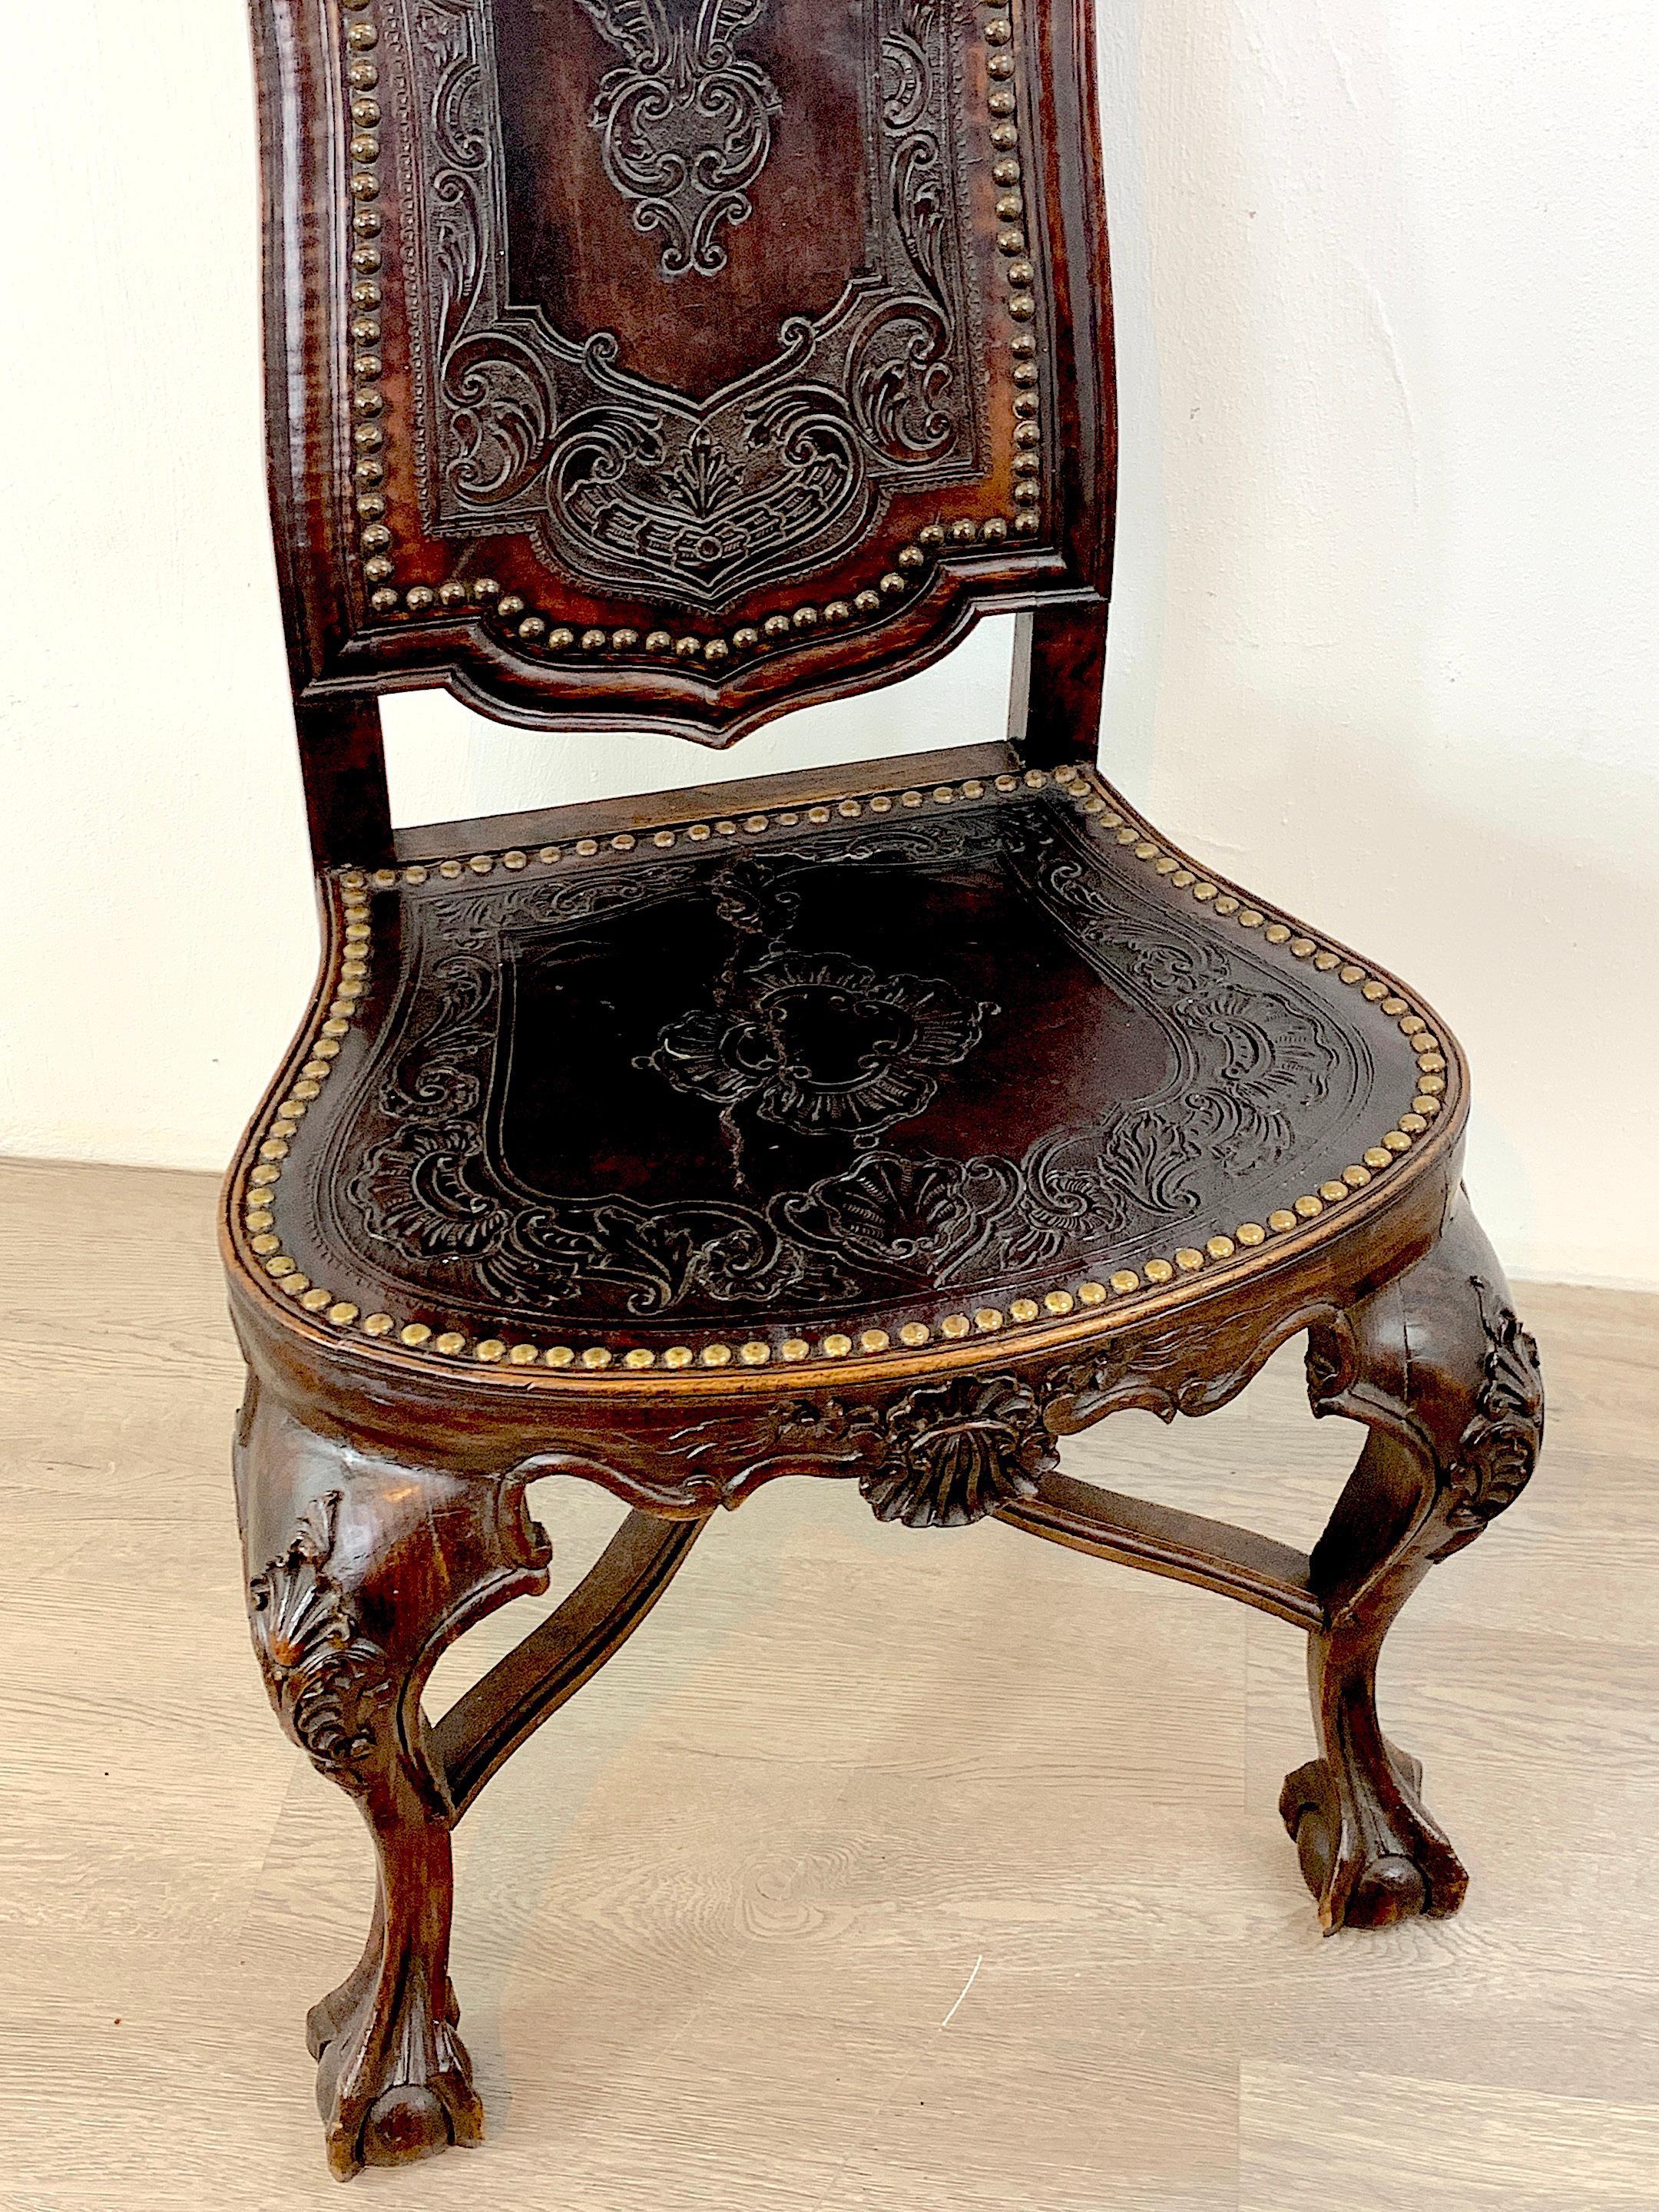 Hand-Carved 18th C Portuguese Carved Mahogany and Embossed Leather Highback Chair